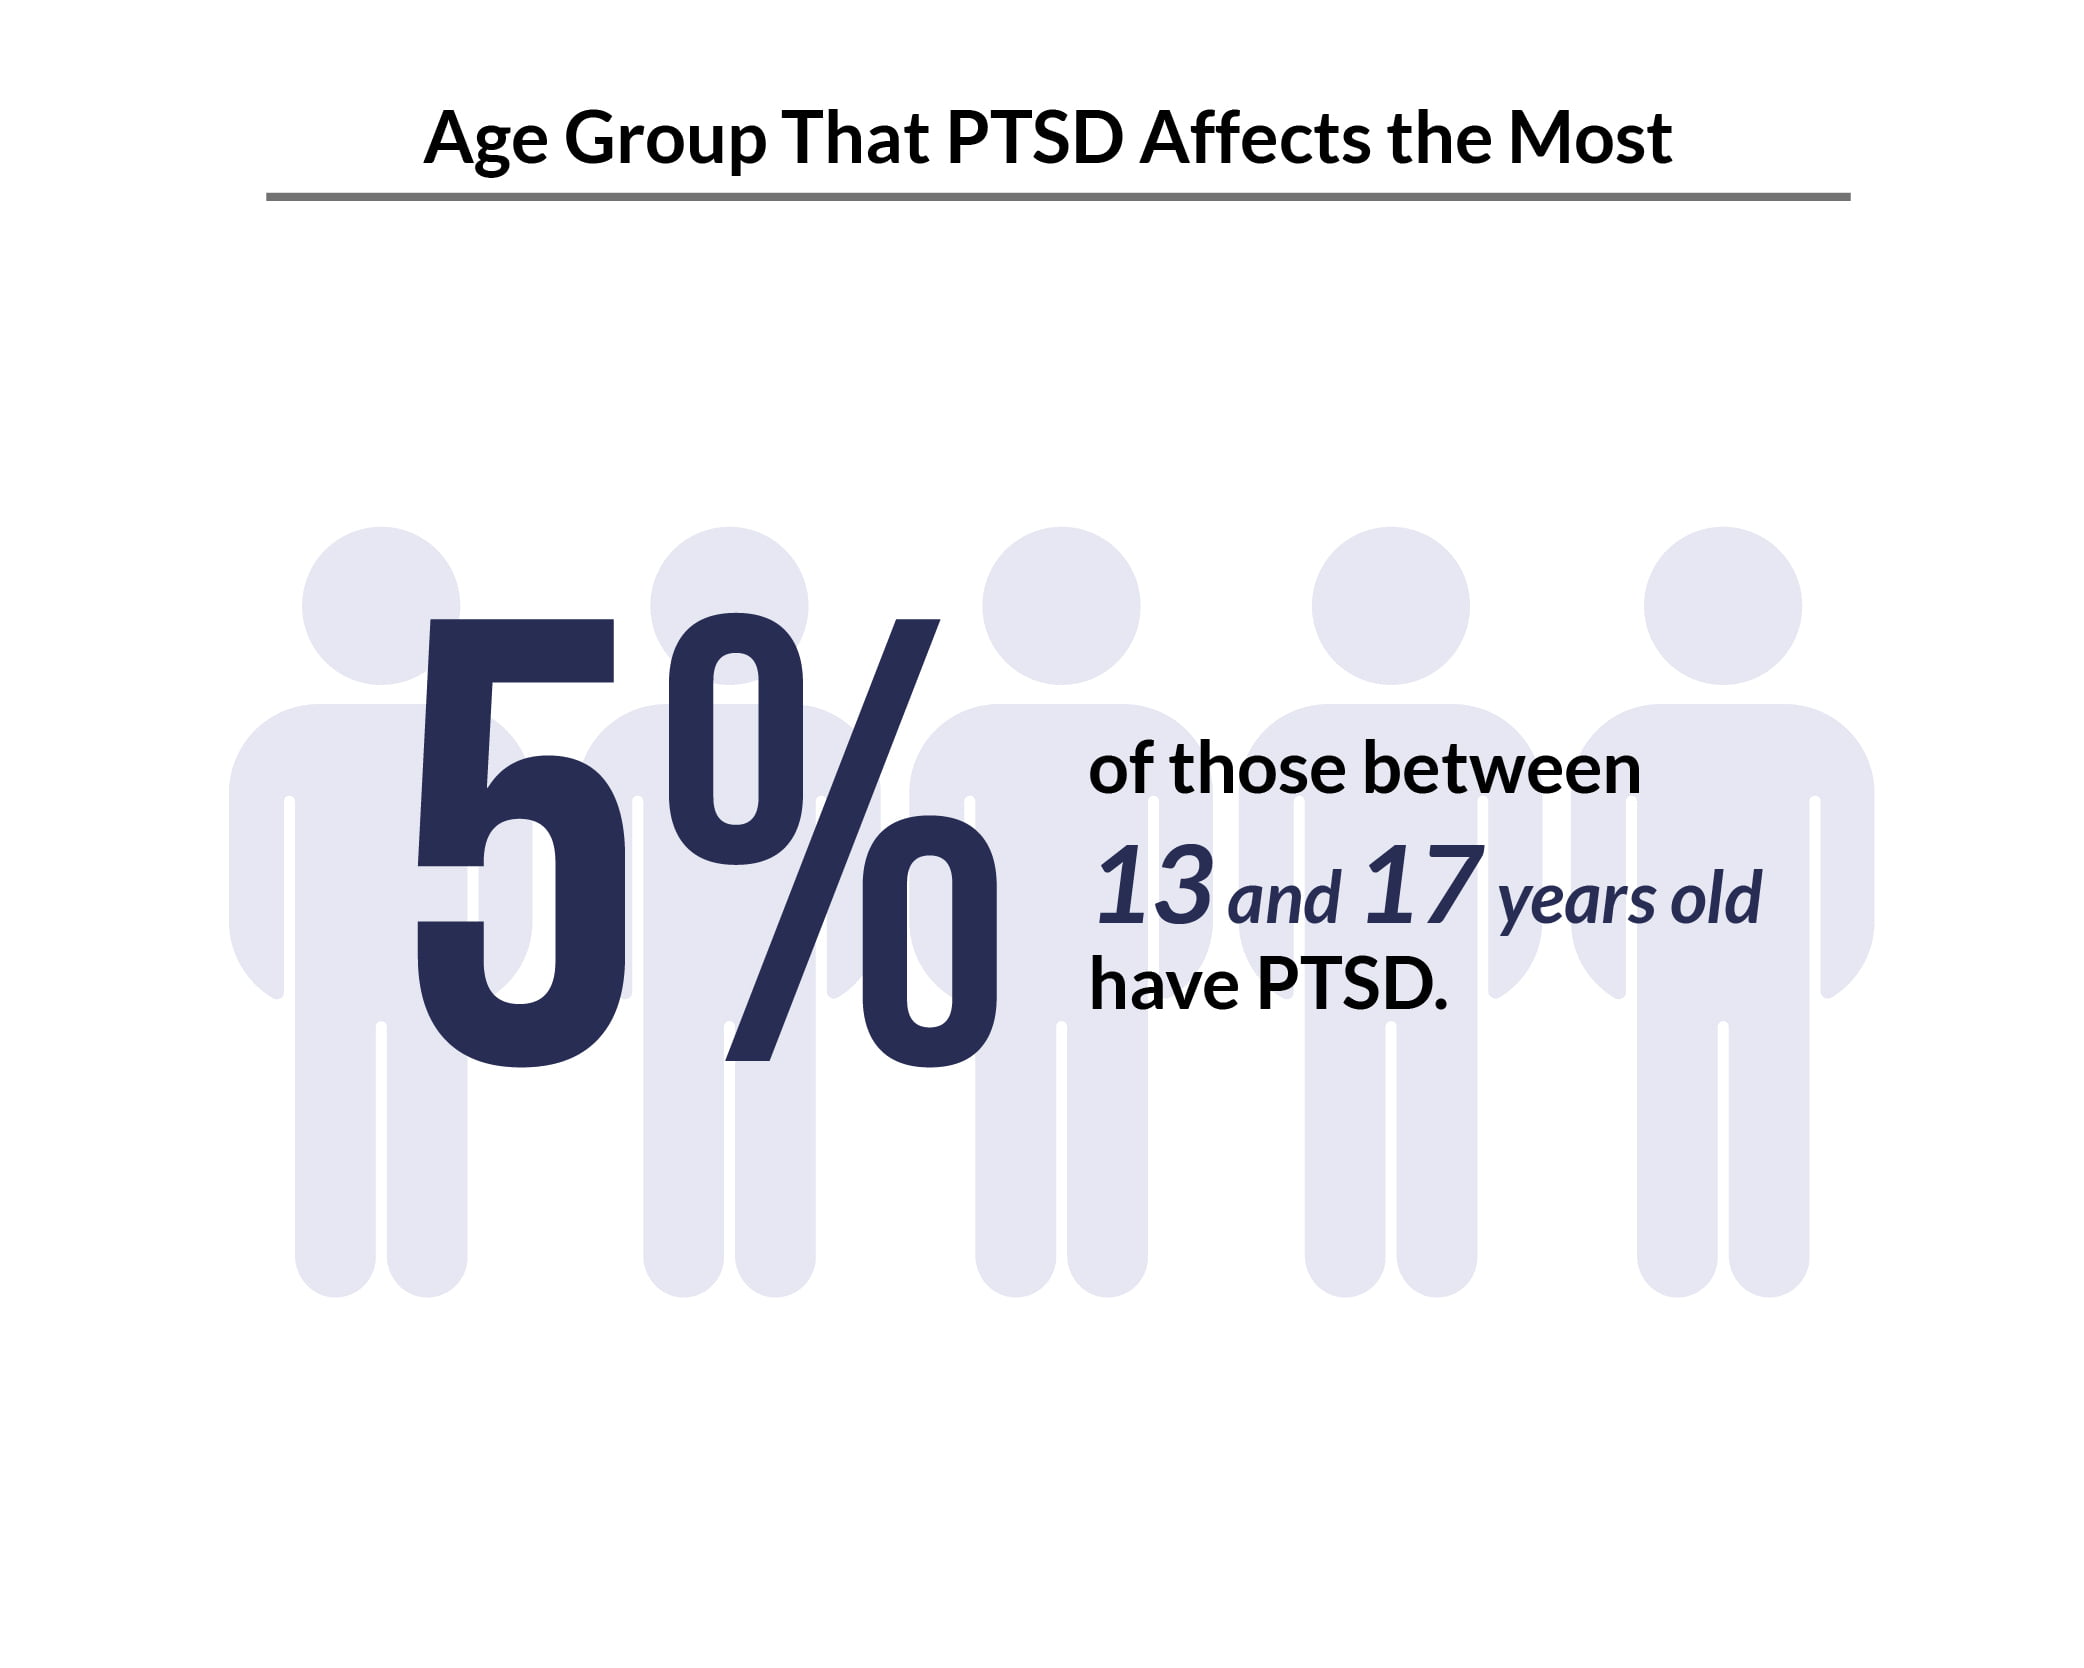 Chart of 5% of those between 13 and 17 years old have PTSD